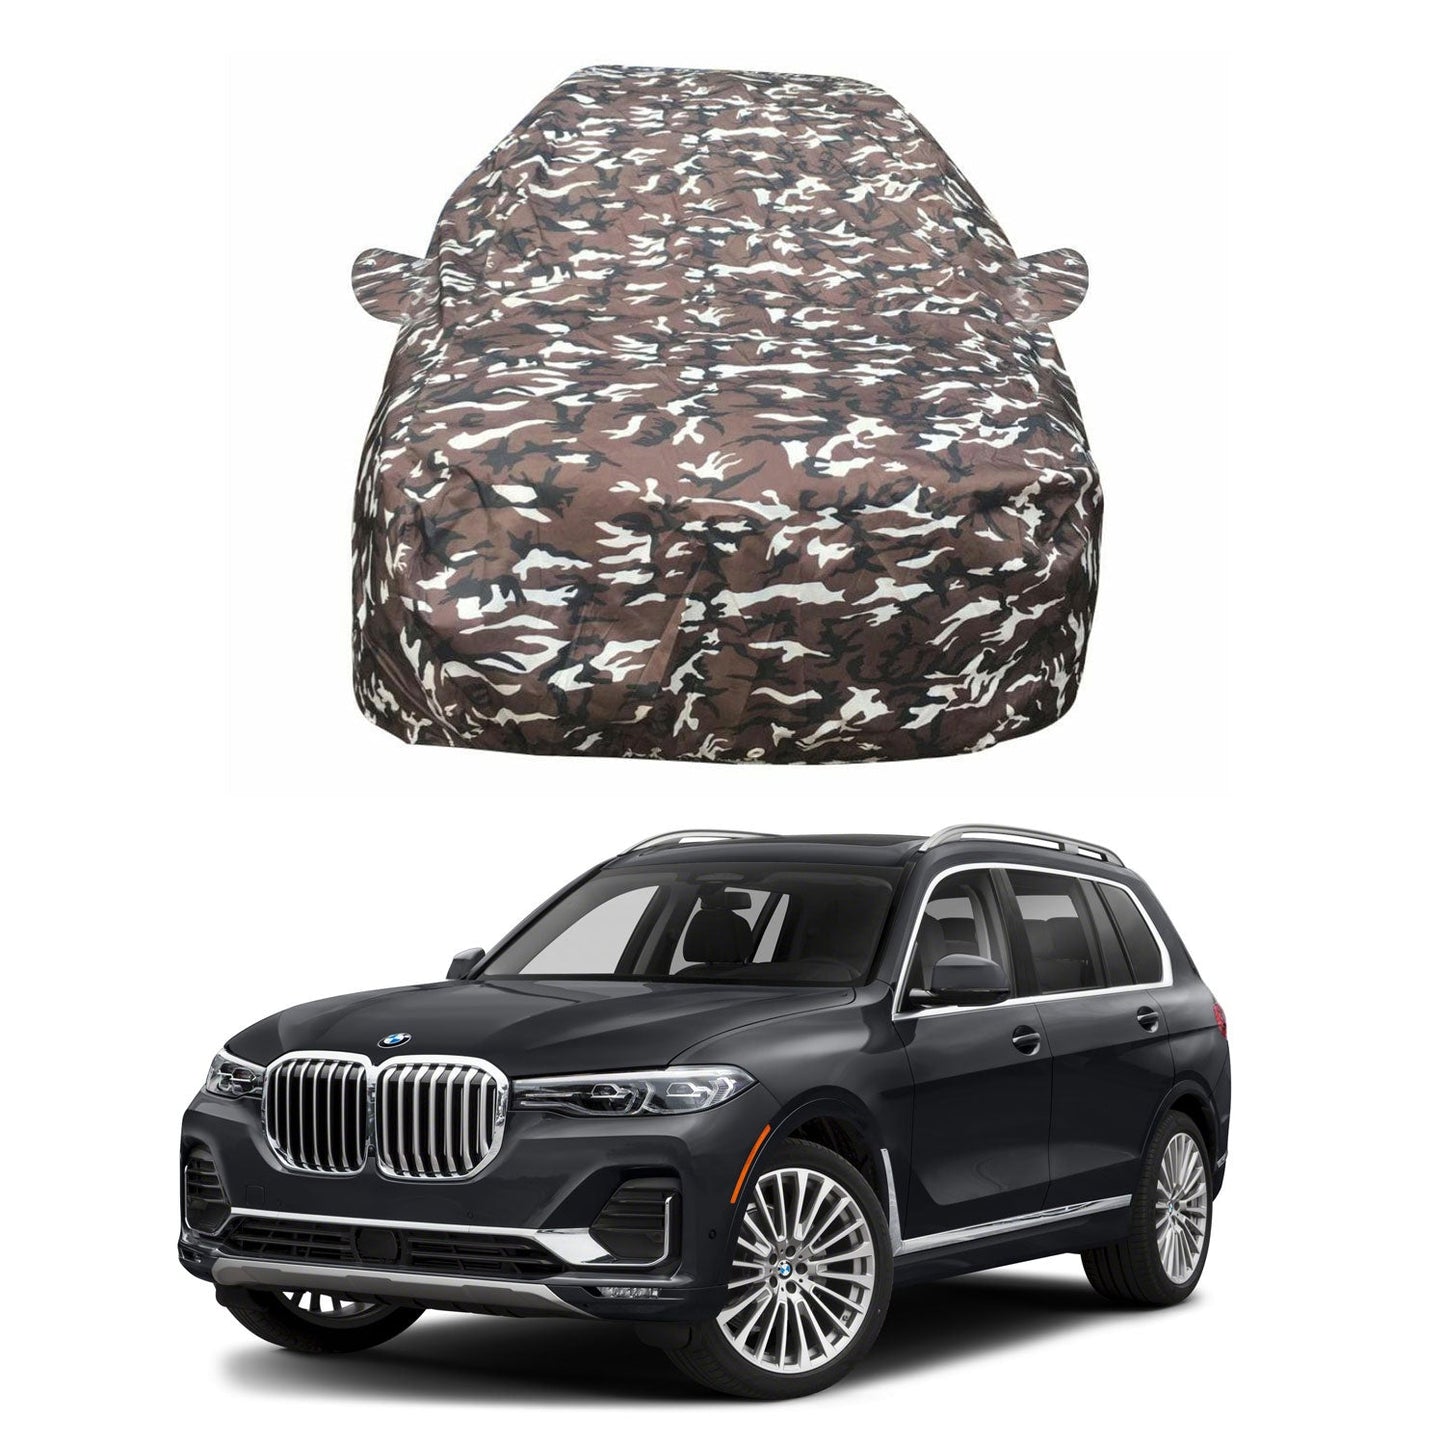 Oshotto Ranger Design Made of 100% Waterproof Fabric Multicolor Car Body Cover with Mirror Pockets For BMW X7